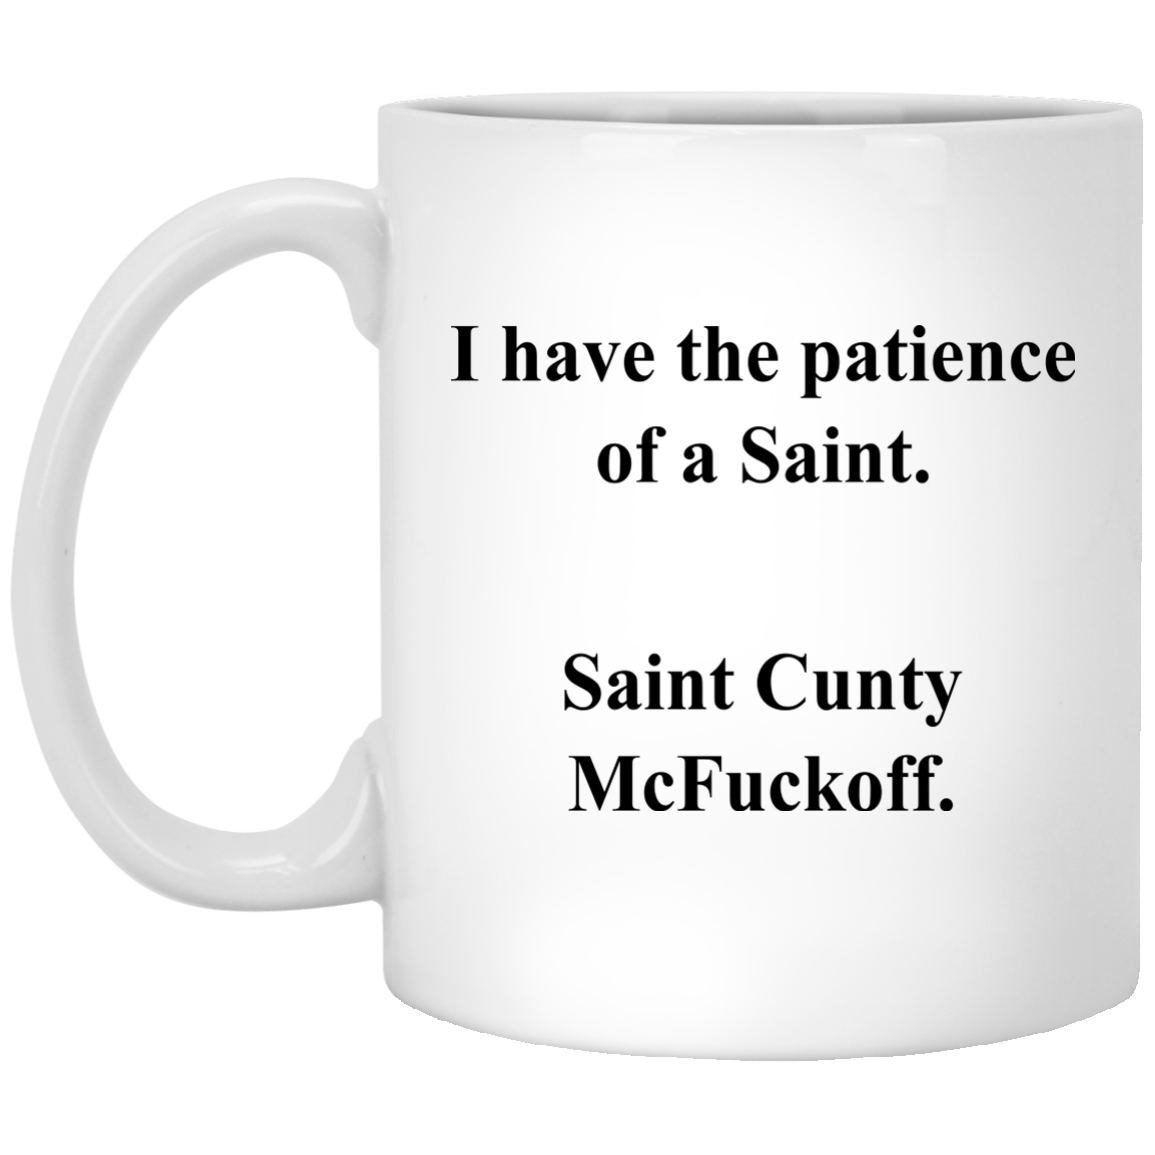 I have the patience of a Saint mugs